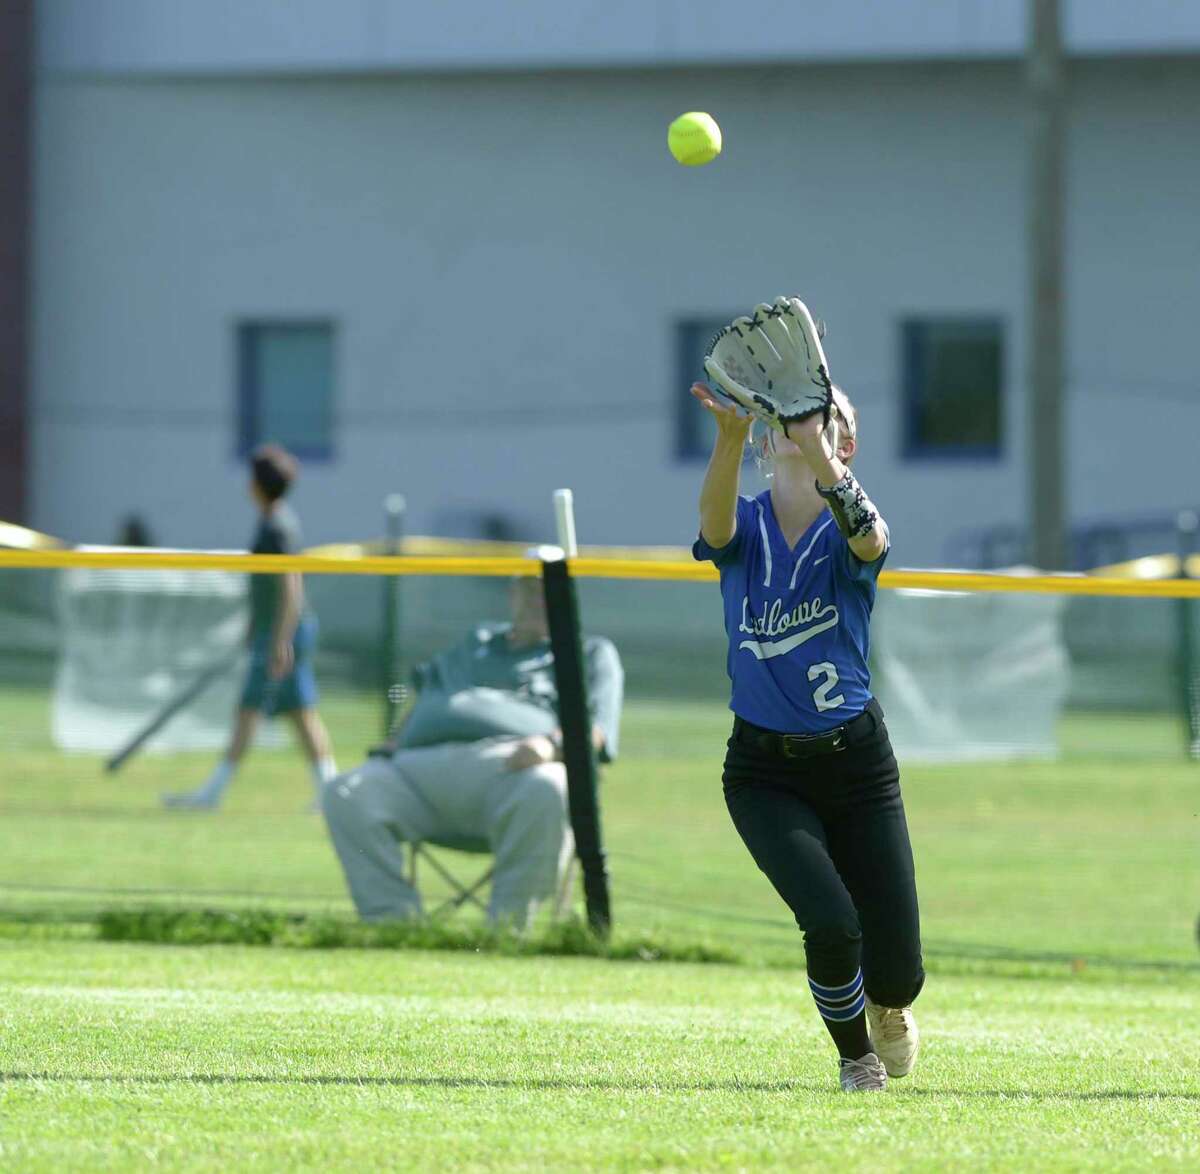 Fairfield Ludlow’s Della Jackson pulls in a fly ball against Danbury on May 17.